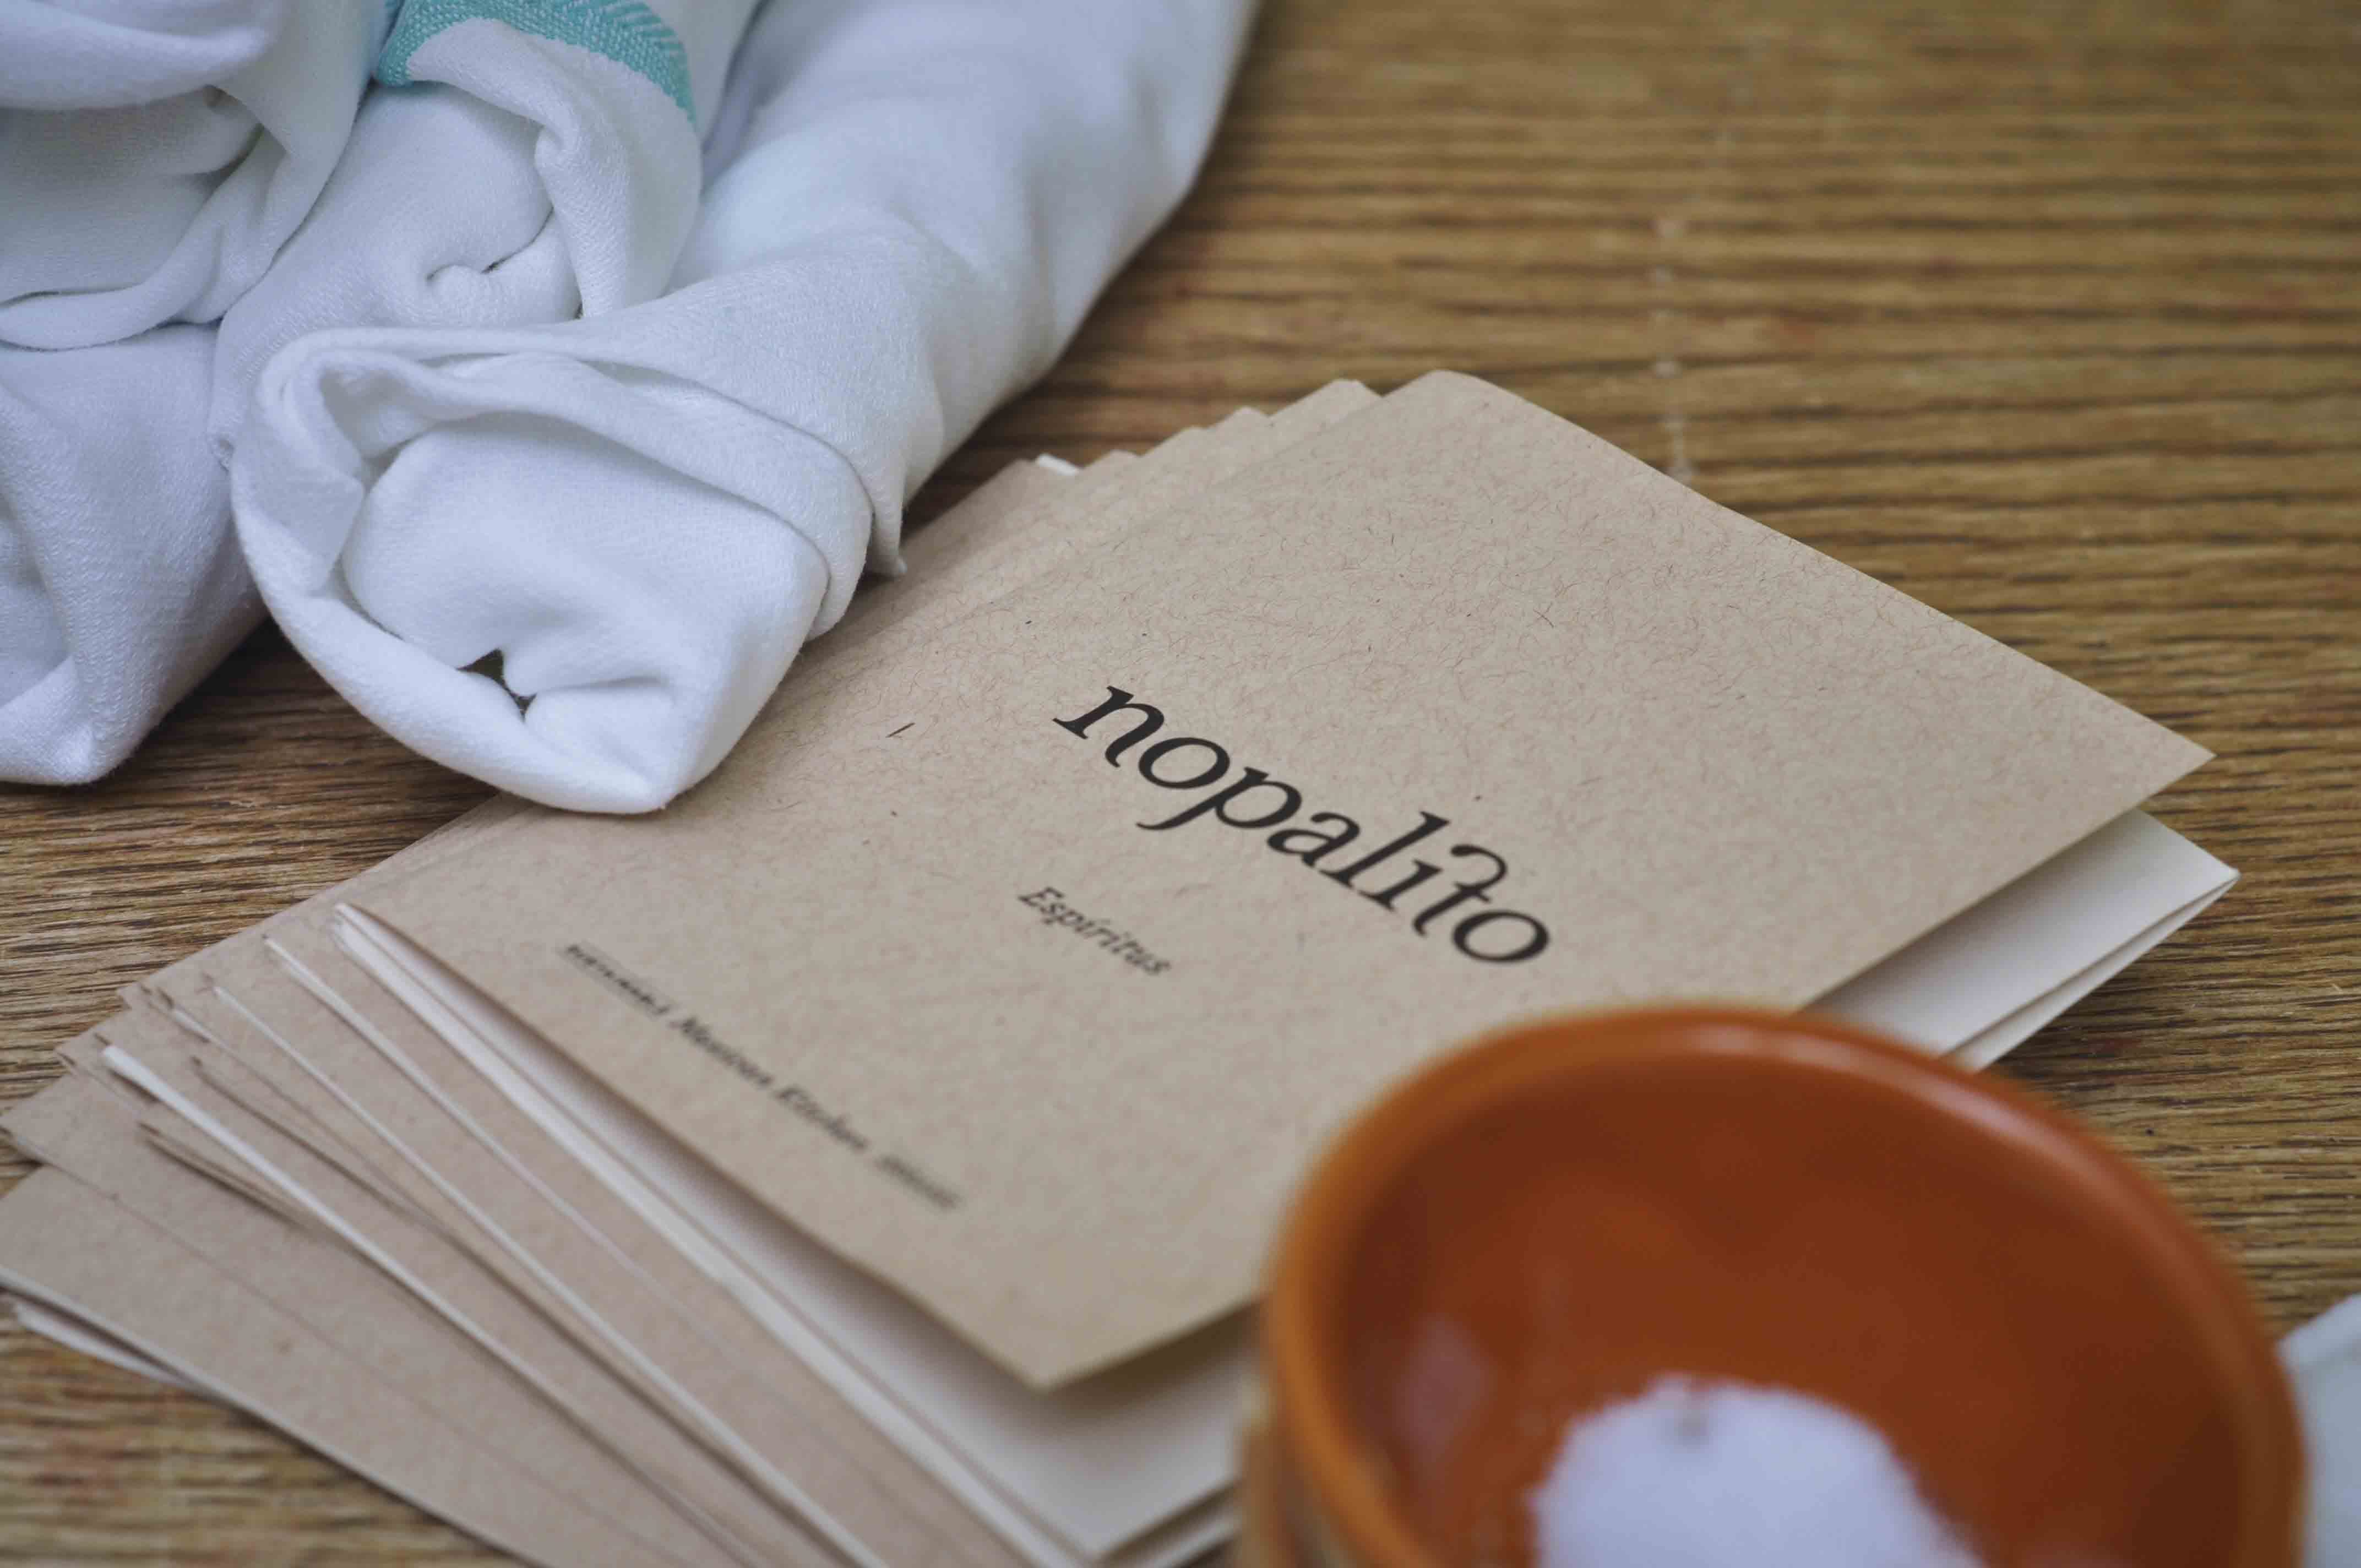 The menu at Nopalito may look simple, but the food is far from it